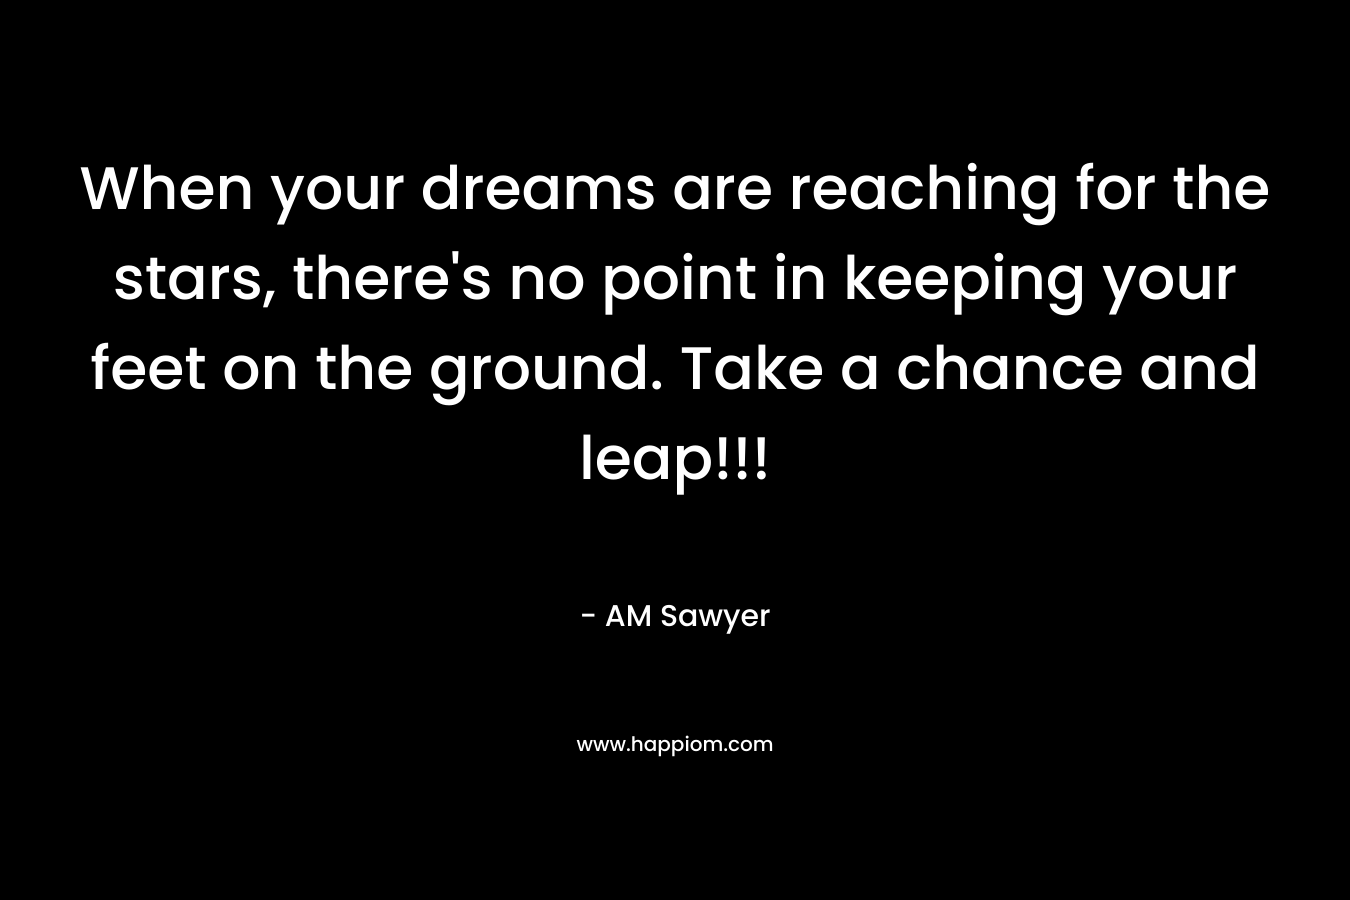 When your dreams are reaching for the stars, there’s no point in keeping your feet on the ground. Take a chance and leap!!! – AM Sawyer